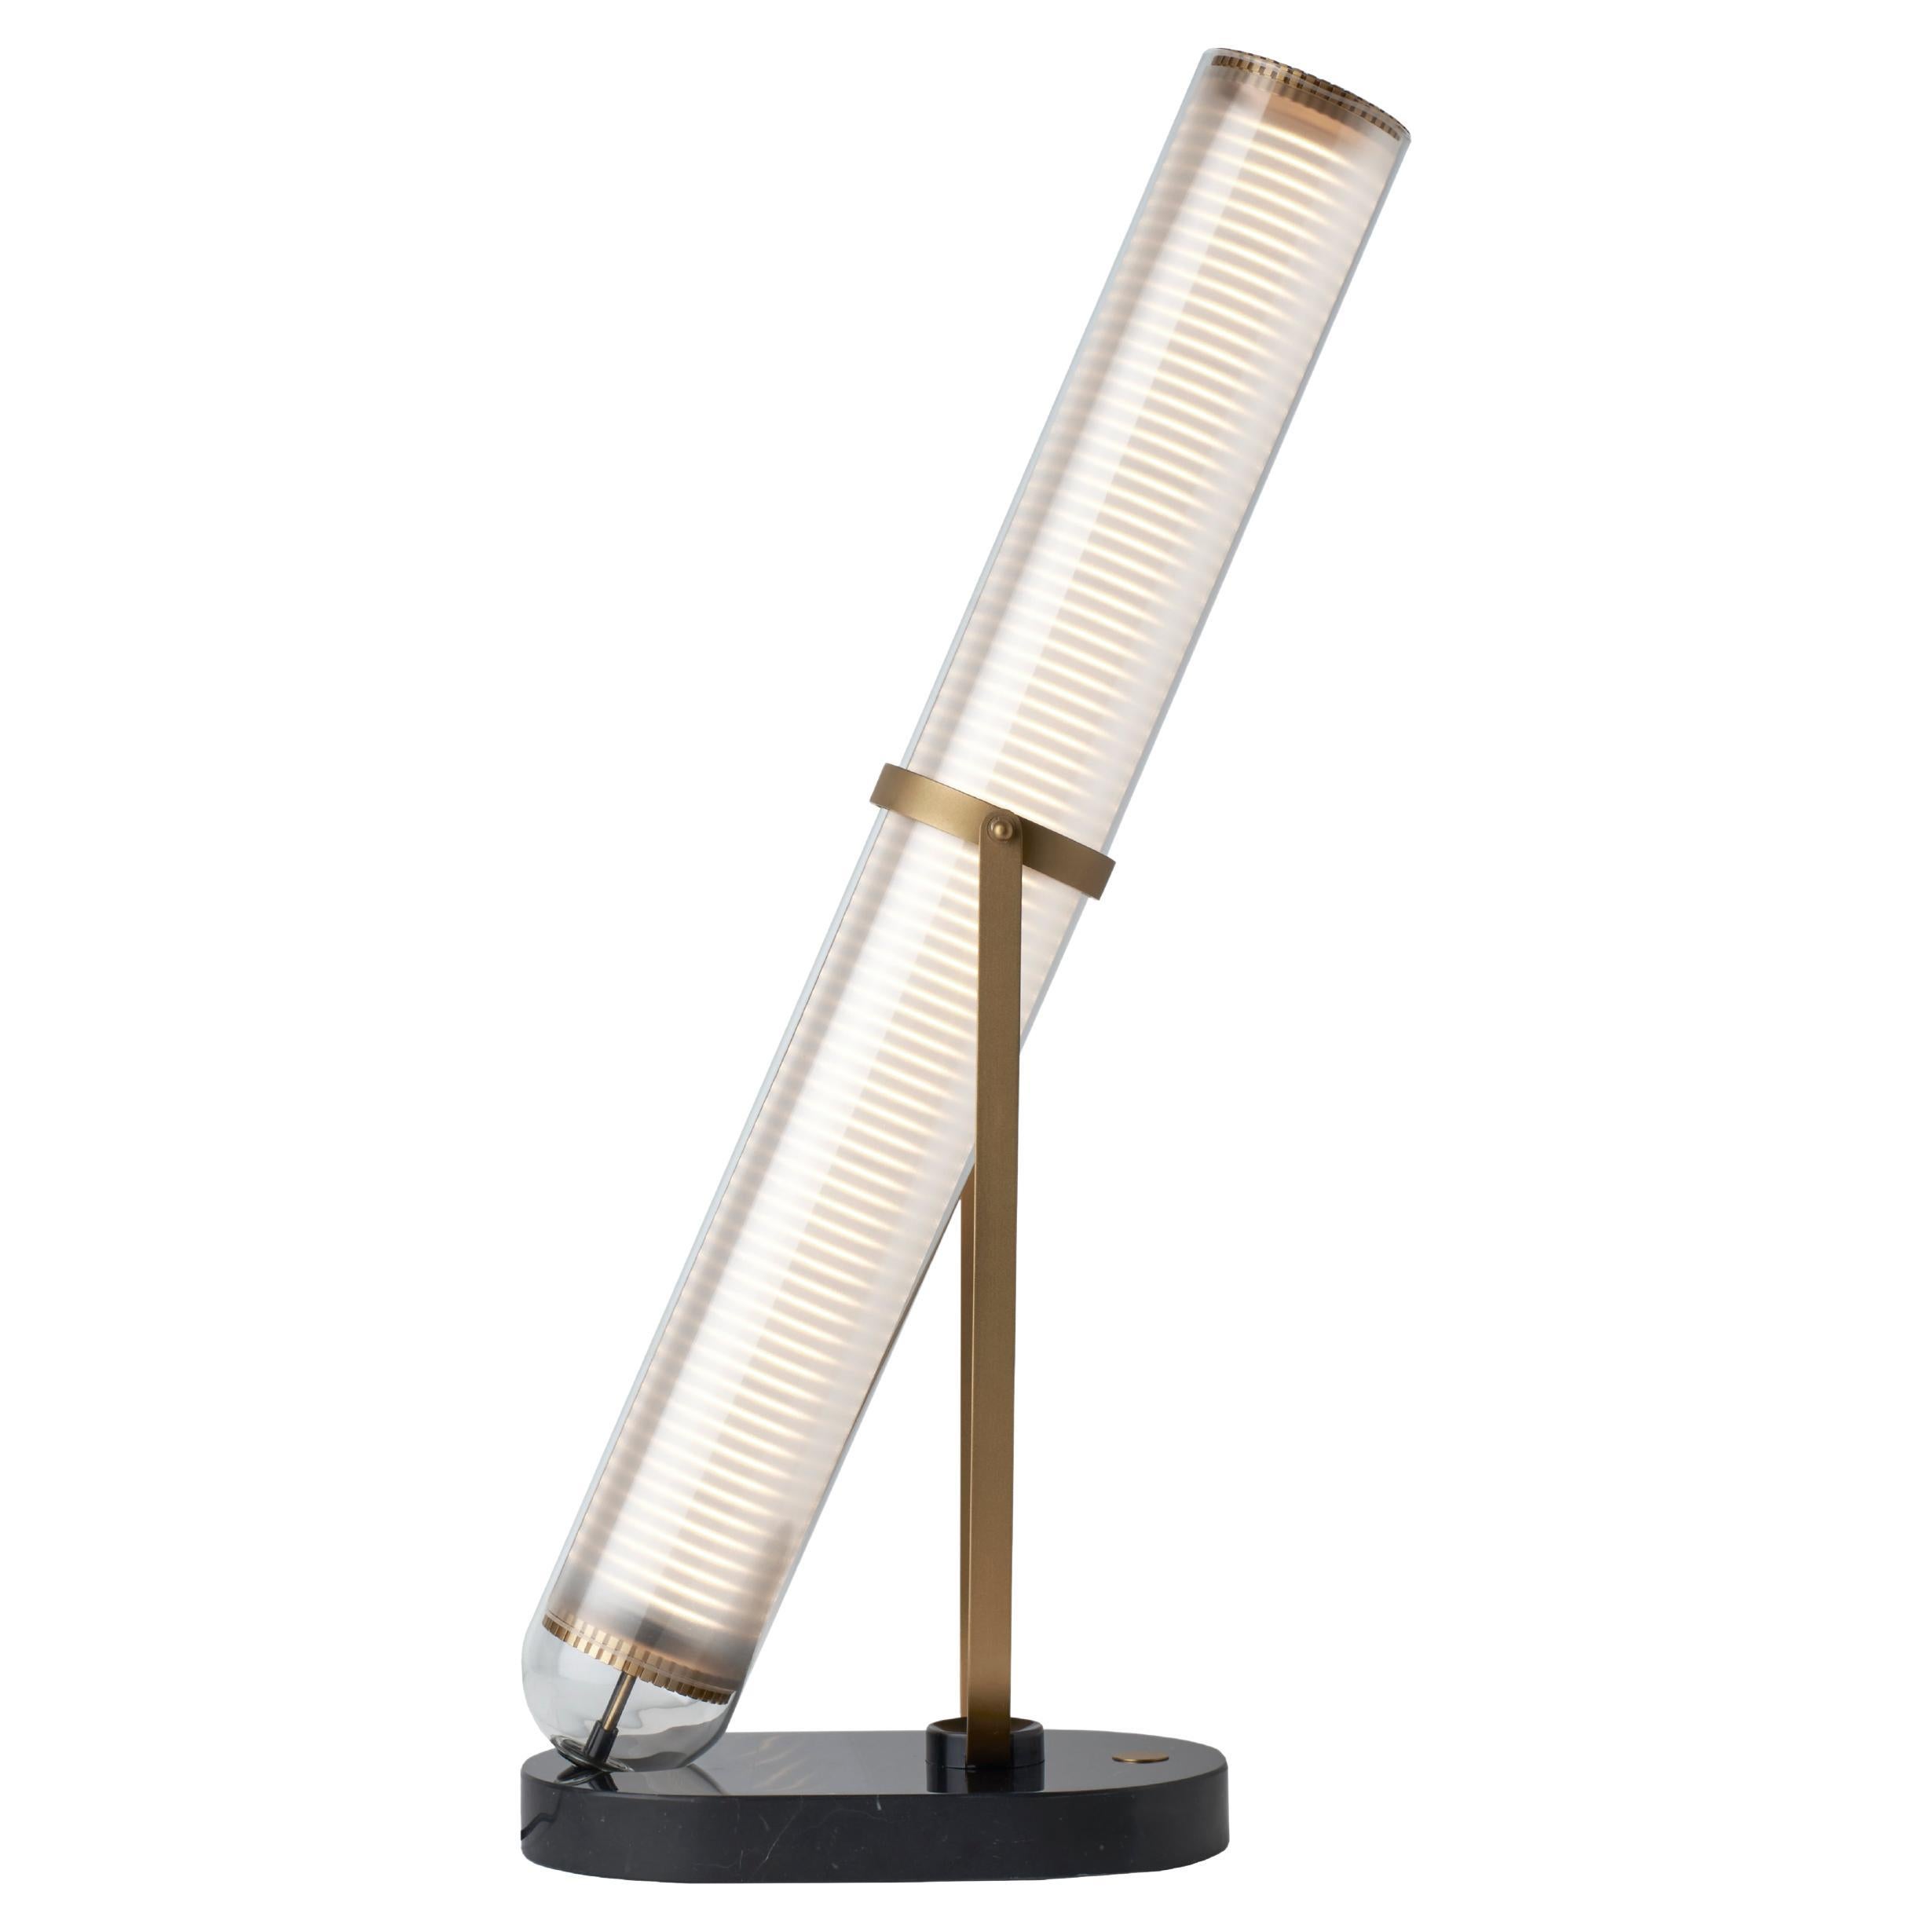 DCW Editions La Lampe Frechin Table Lamp in Gold Black by Jean-Louis Frechin For Sale